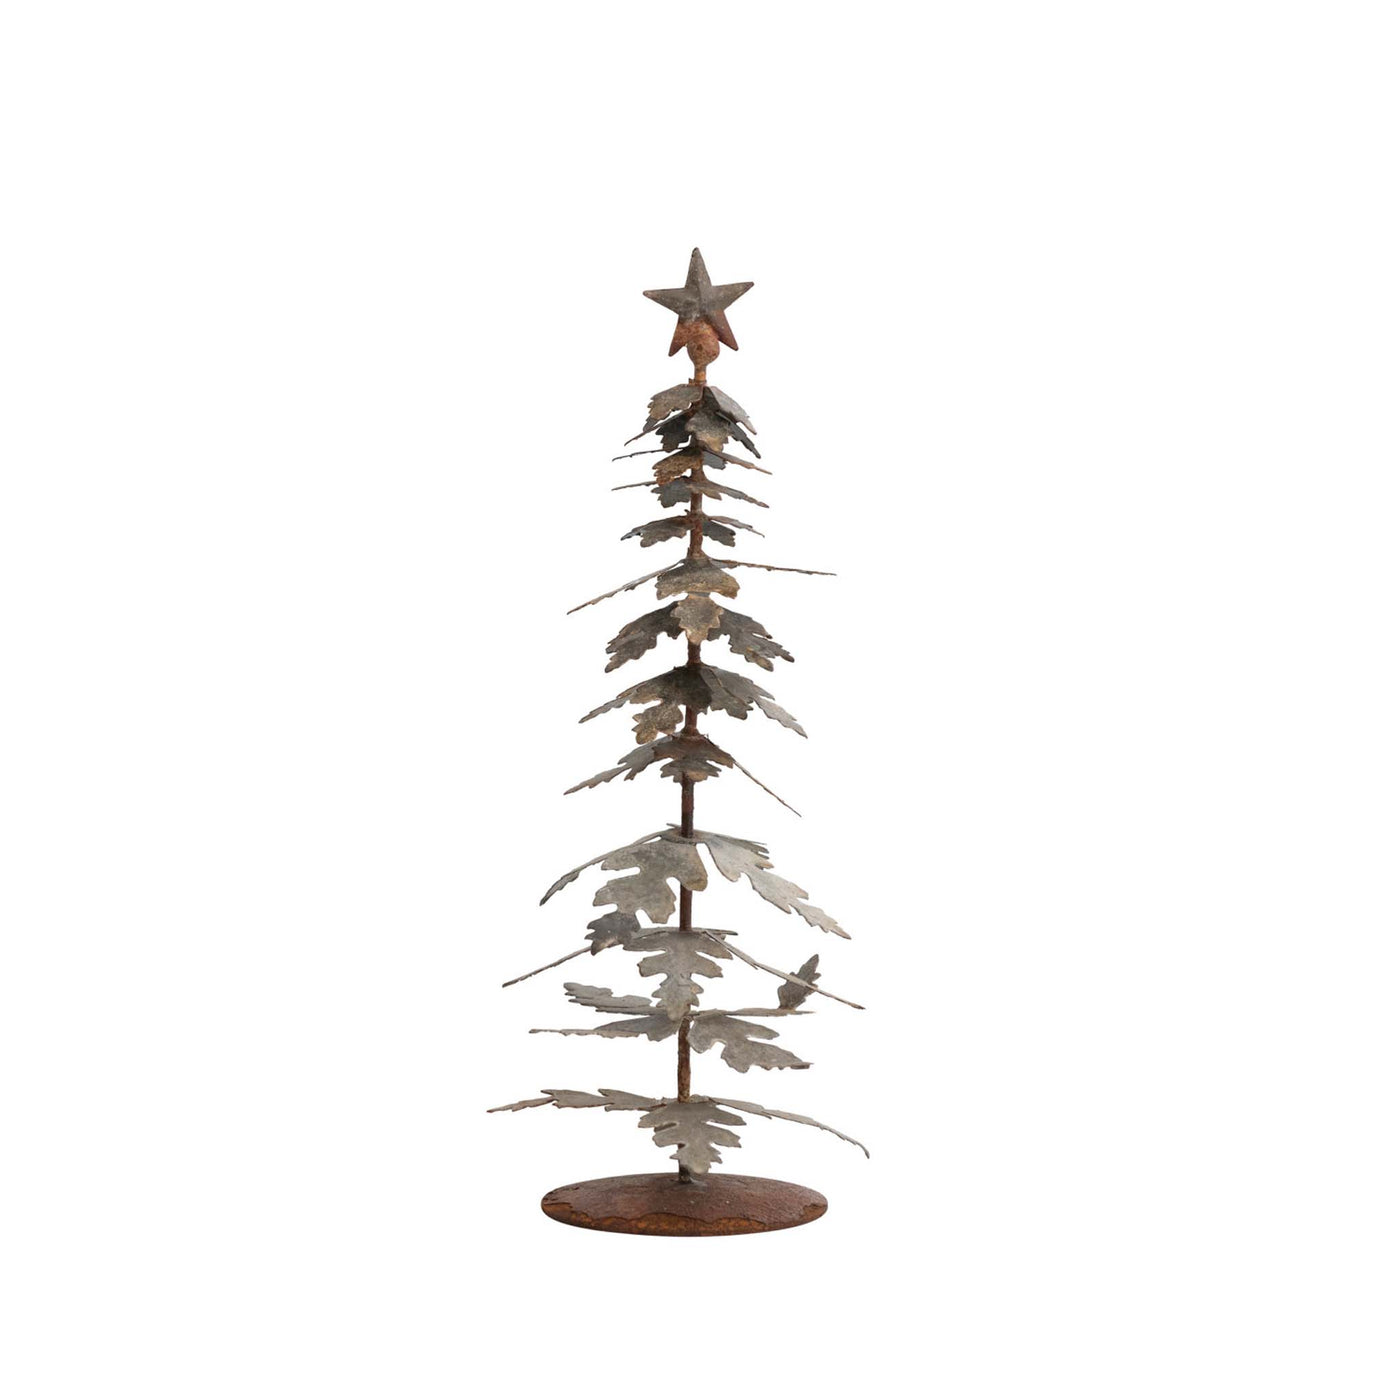 Metal Tree with Star (2 sizes)